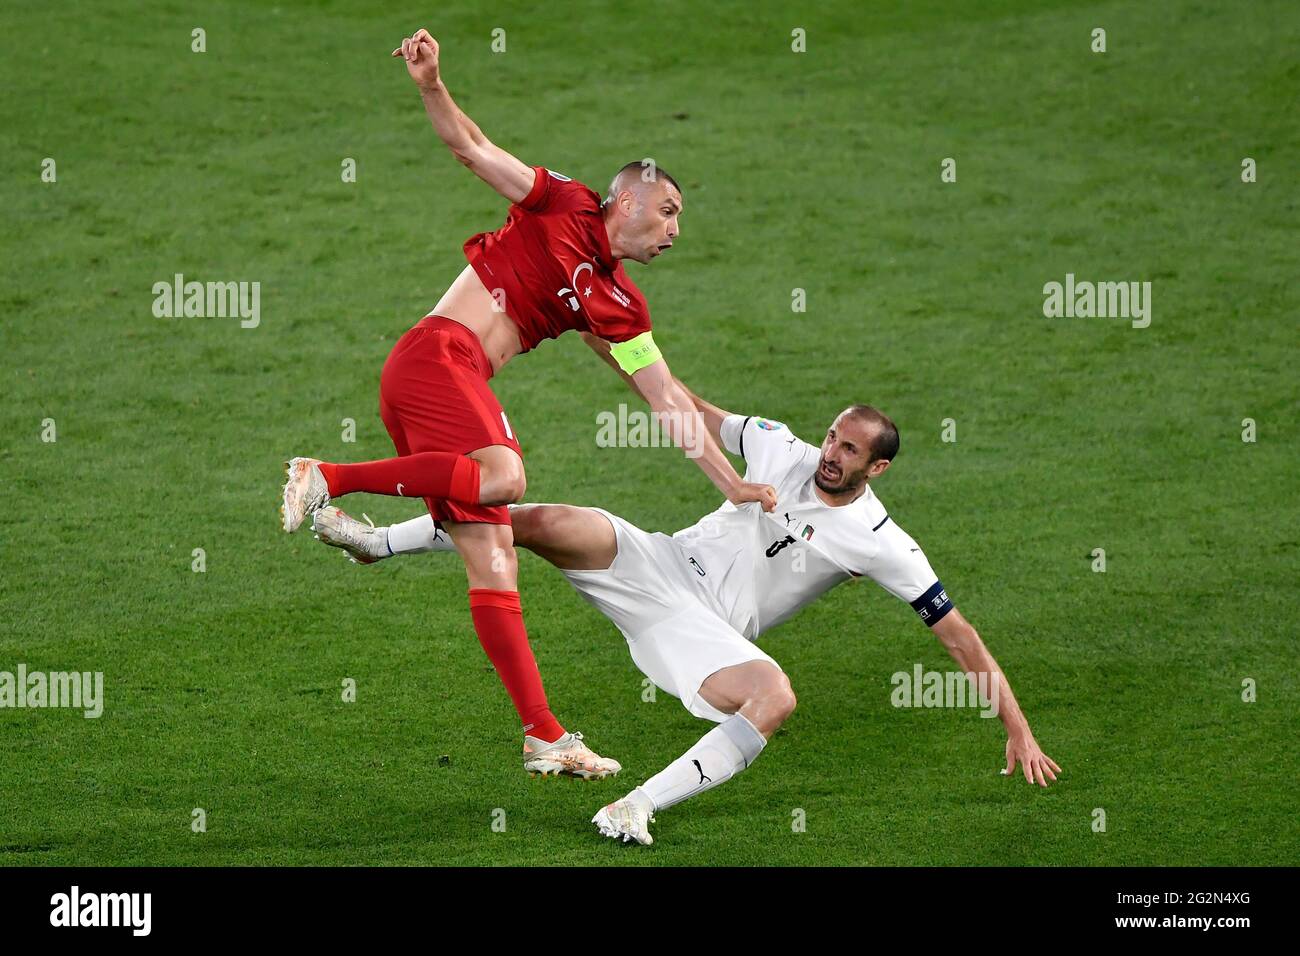 Roma, Italy. 11th June, 2021. Burak Yilmaz of Turkey and Giorgio Chiellini  of Italy compete for the ball during the Uefa Euro 2020 Group stage - Group  A football match between Turkey